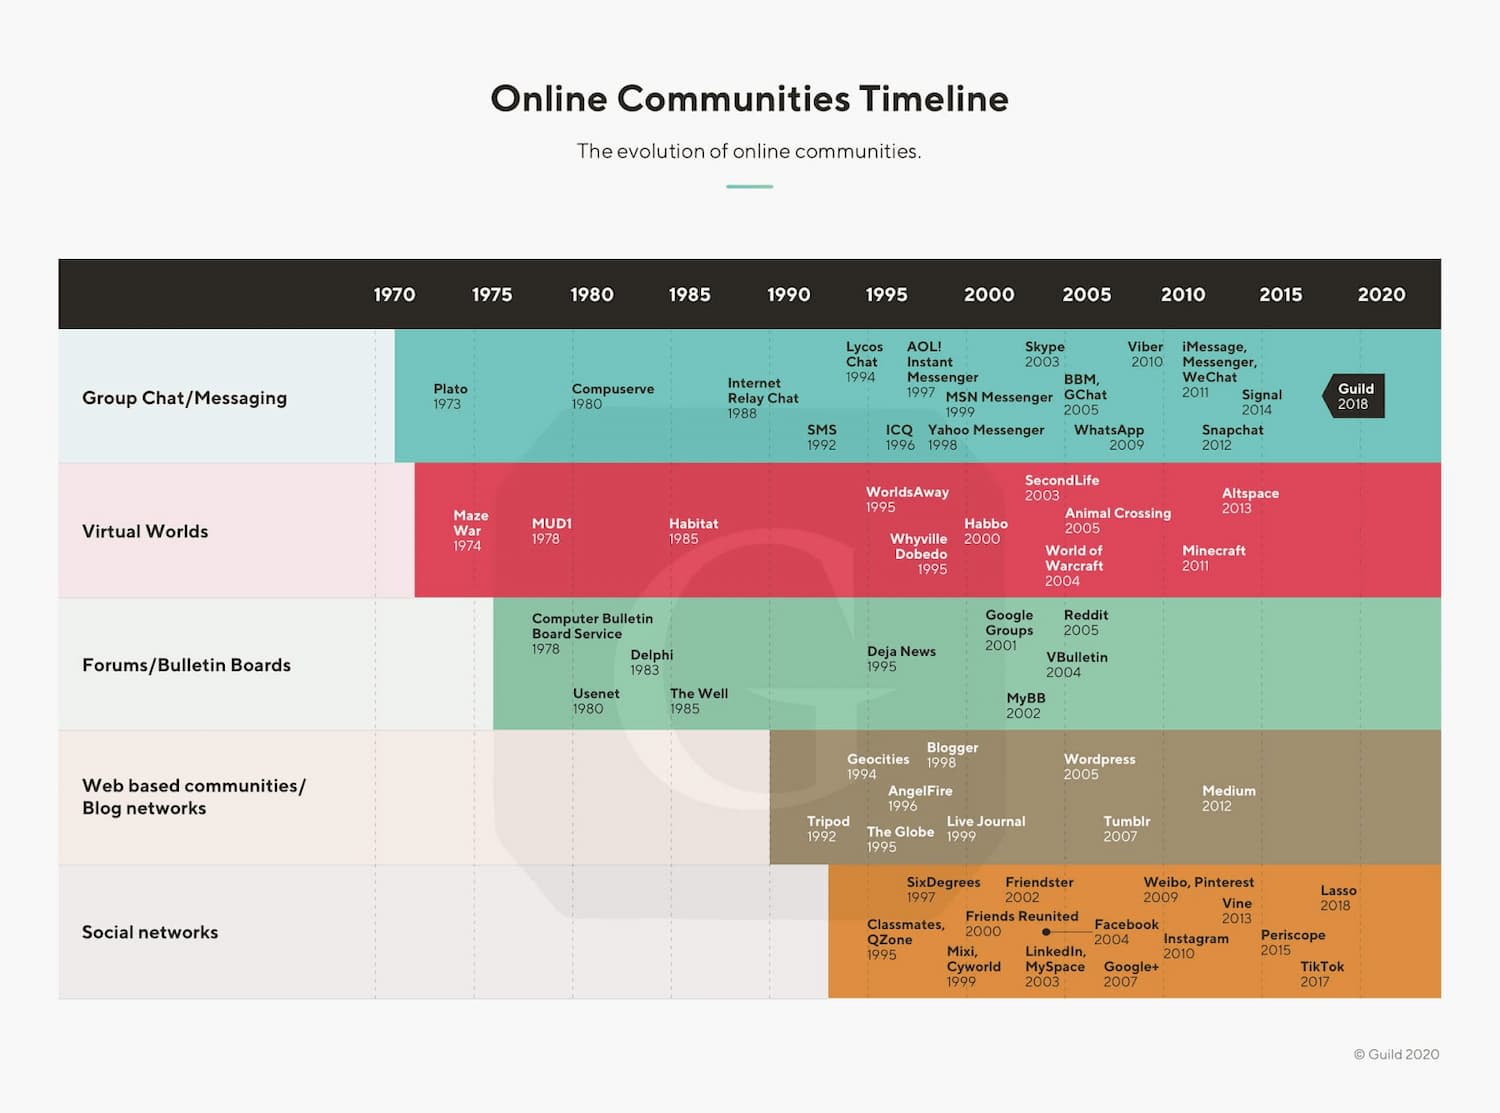 A timeline of online communities from the 1970s to 2020s - see A History of Online Communities for more detail